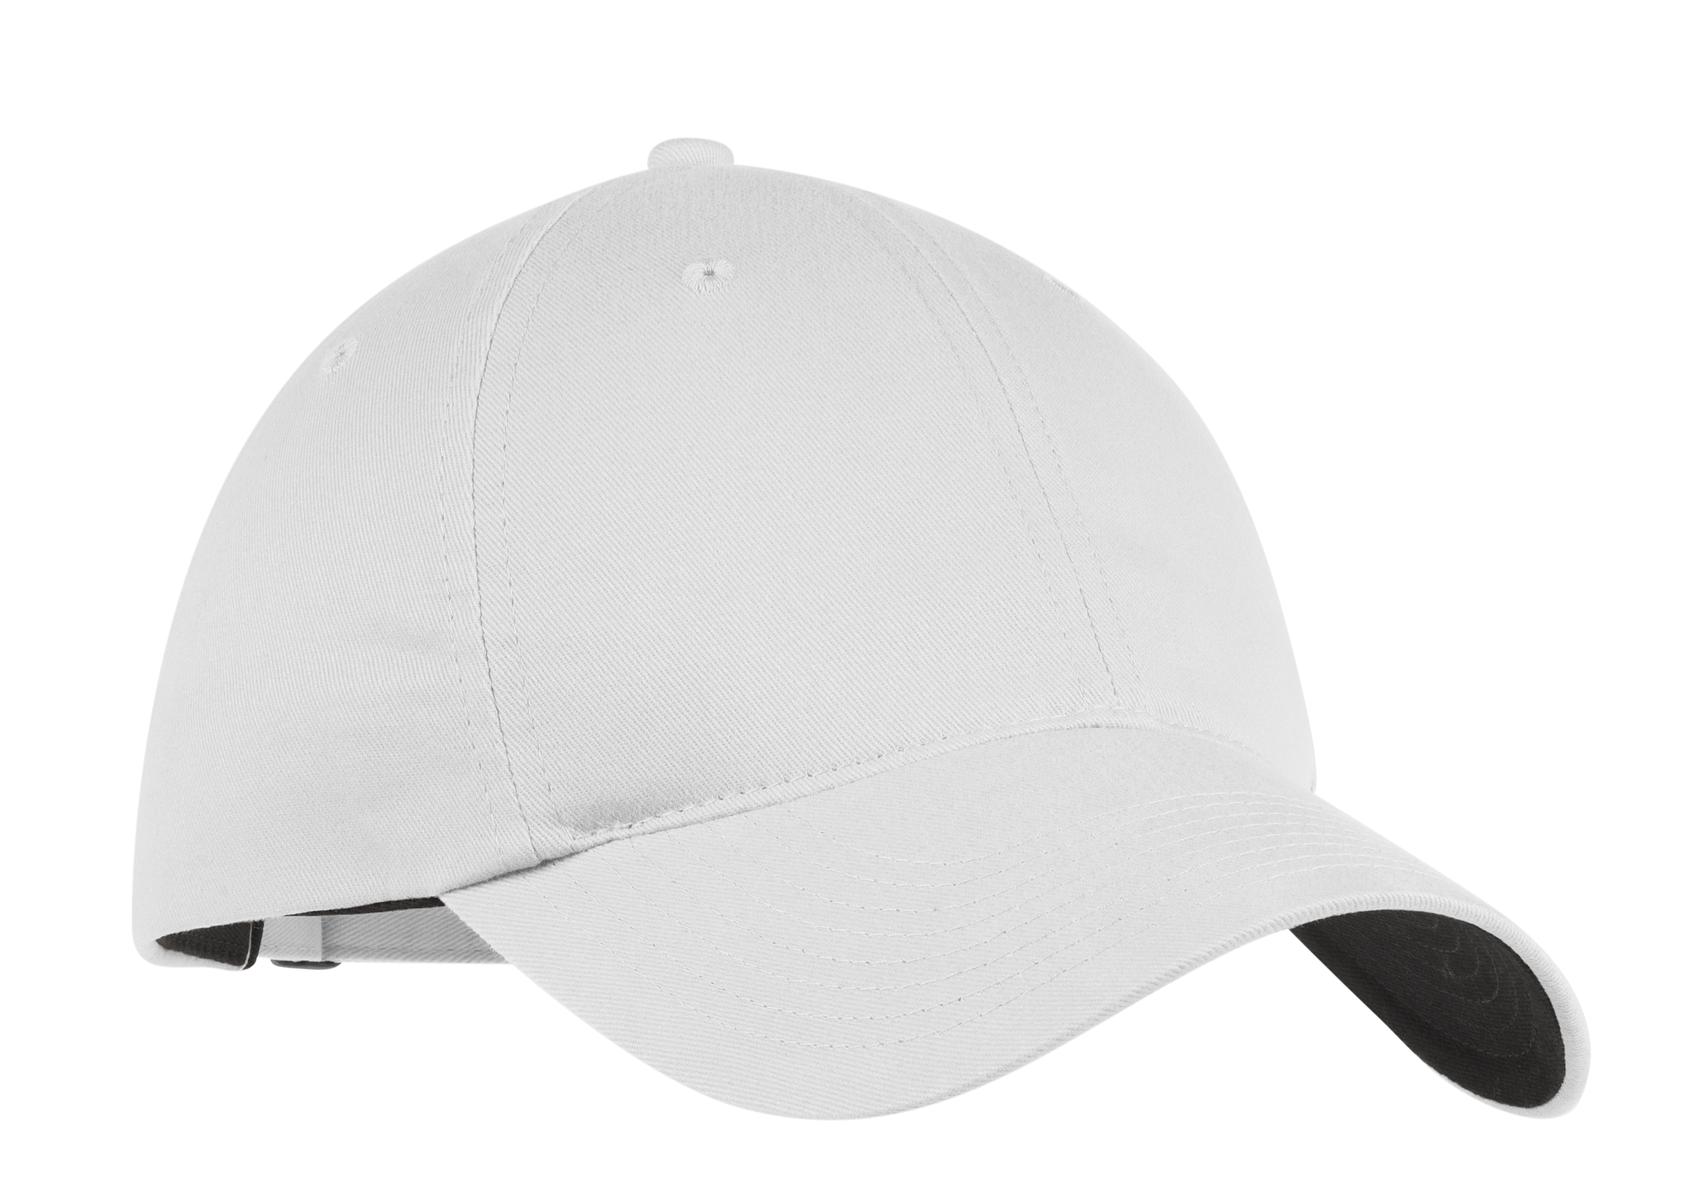 Nike Unstructured Twill Cap-Nike